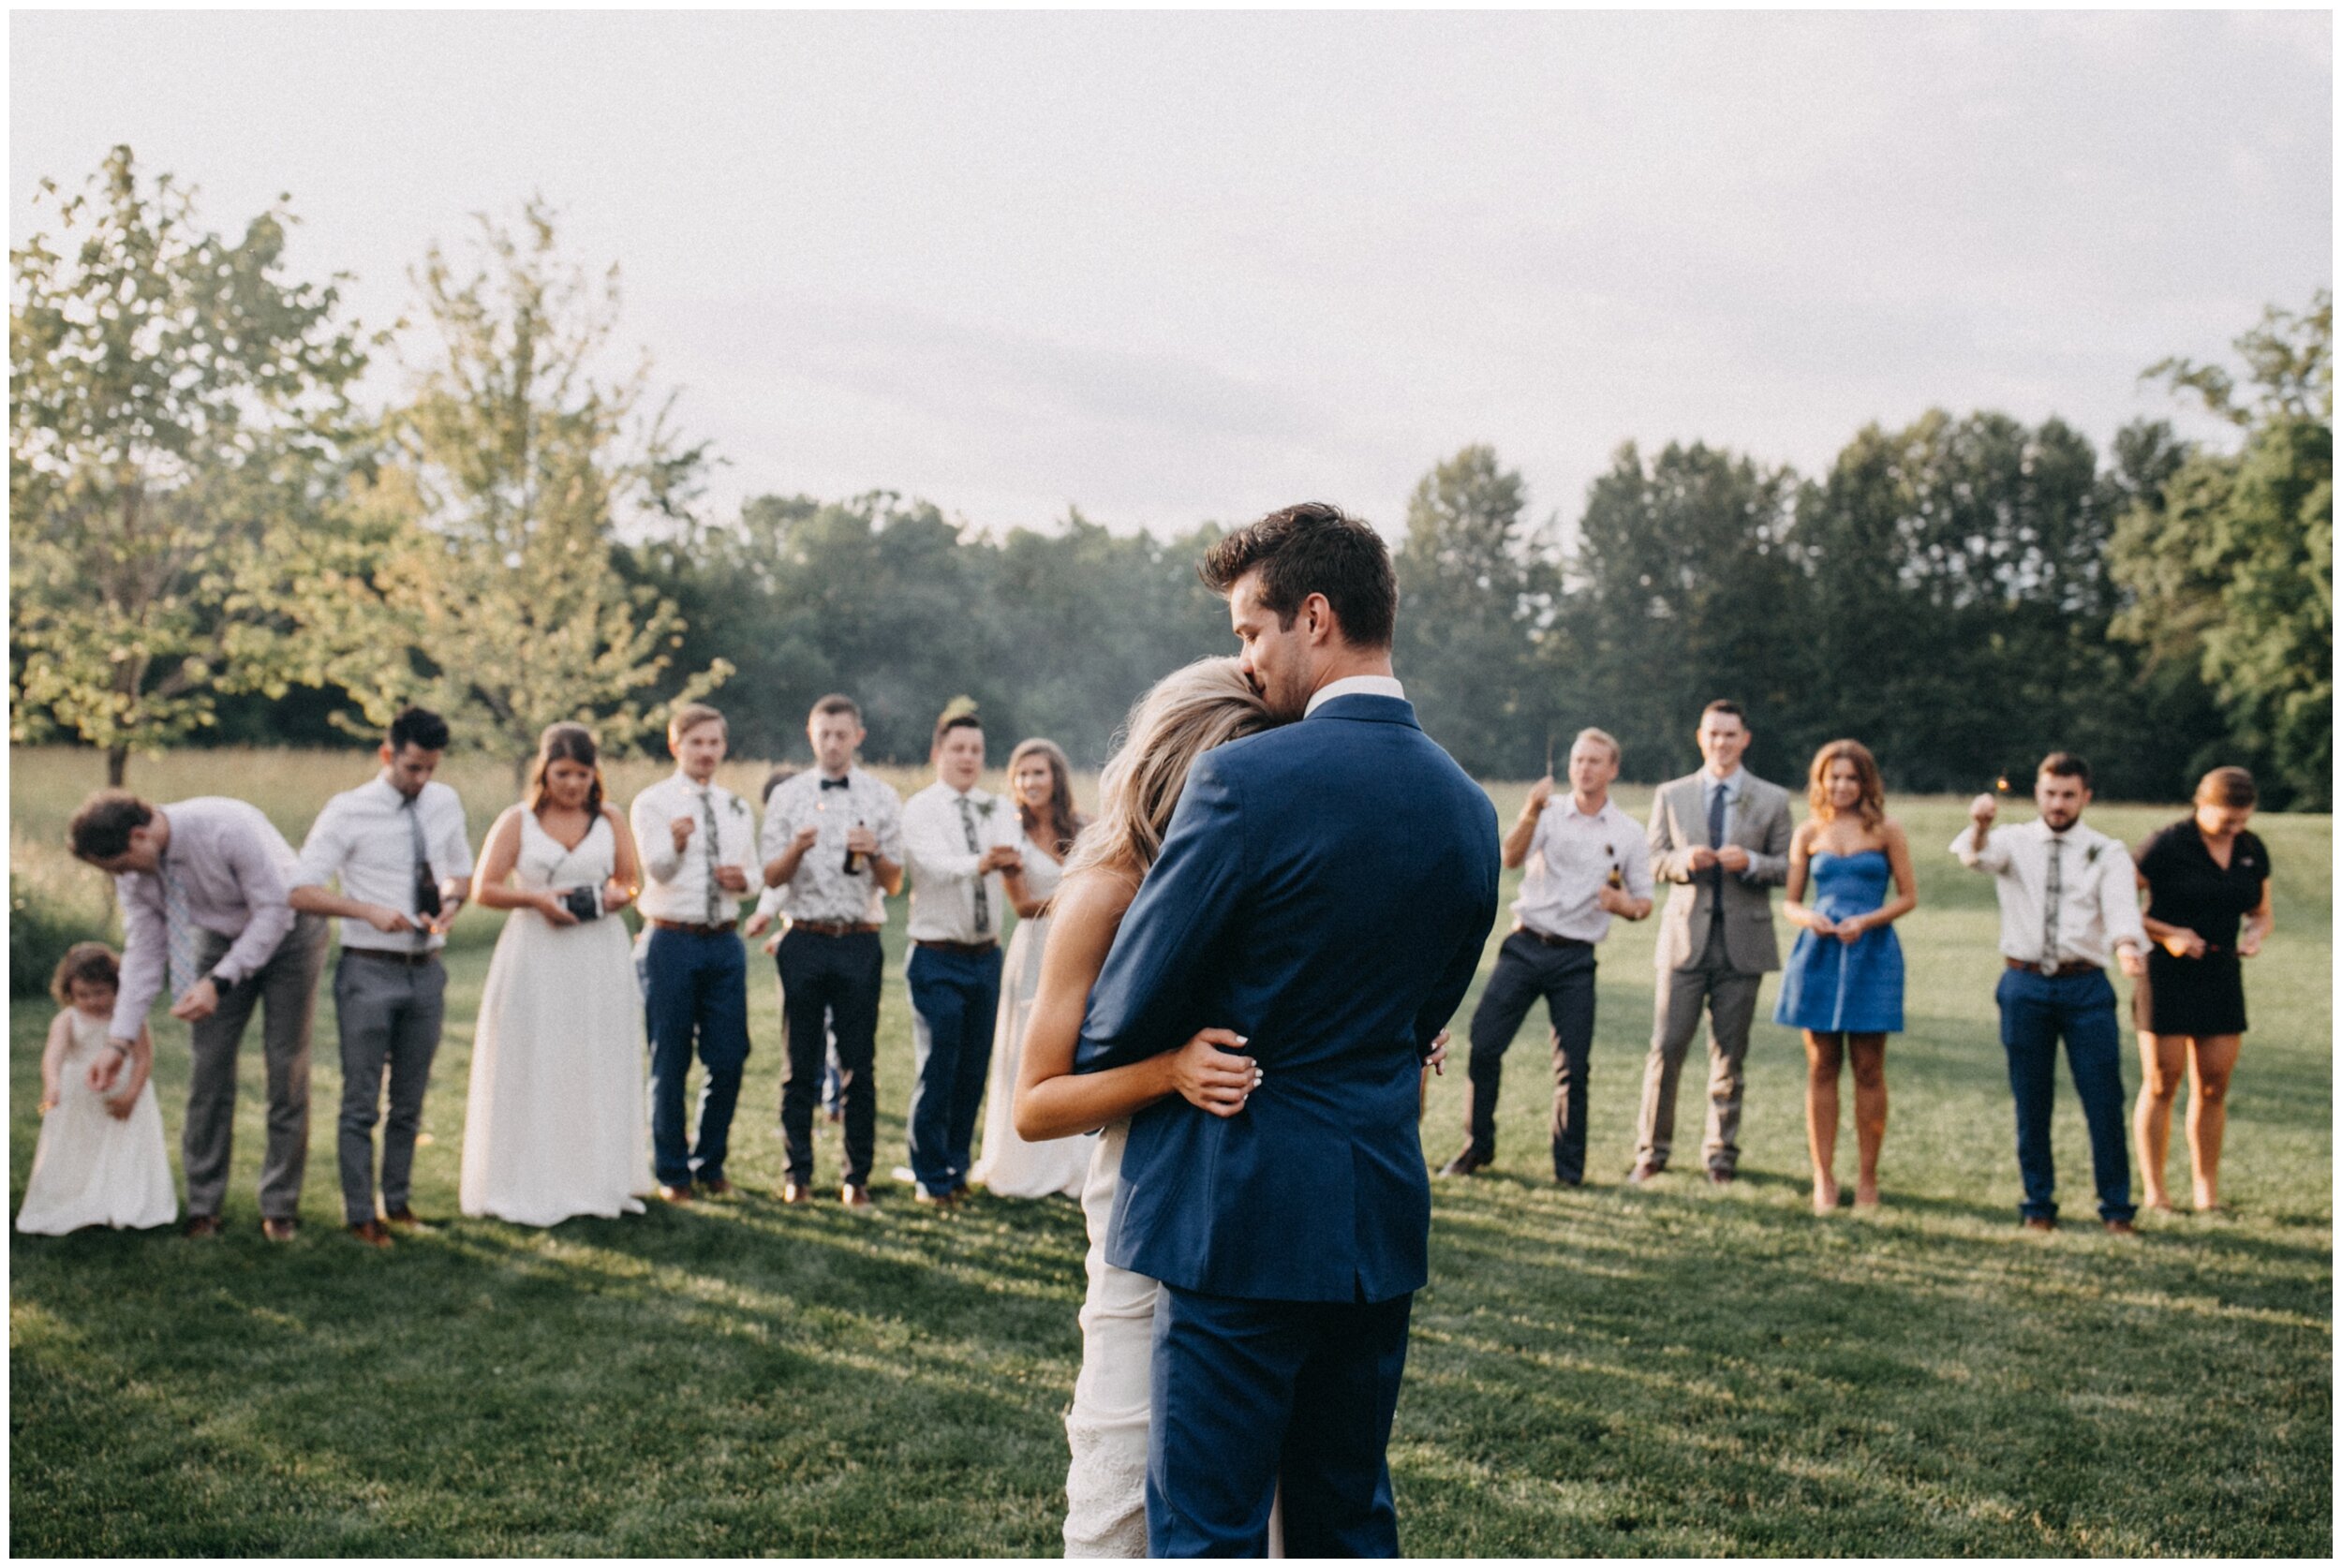 Bride and groom first dance with sparklers during Minnesota barn wedding at Creekside Farm